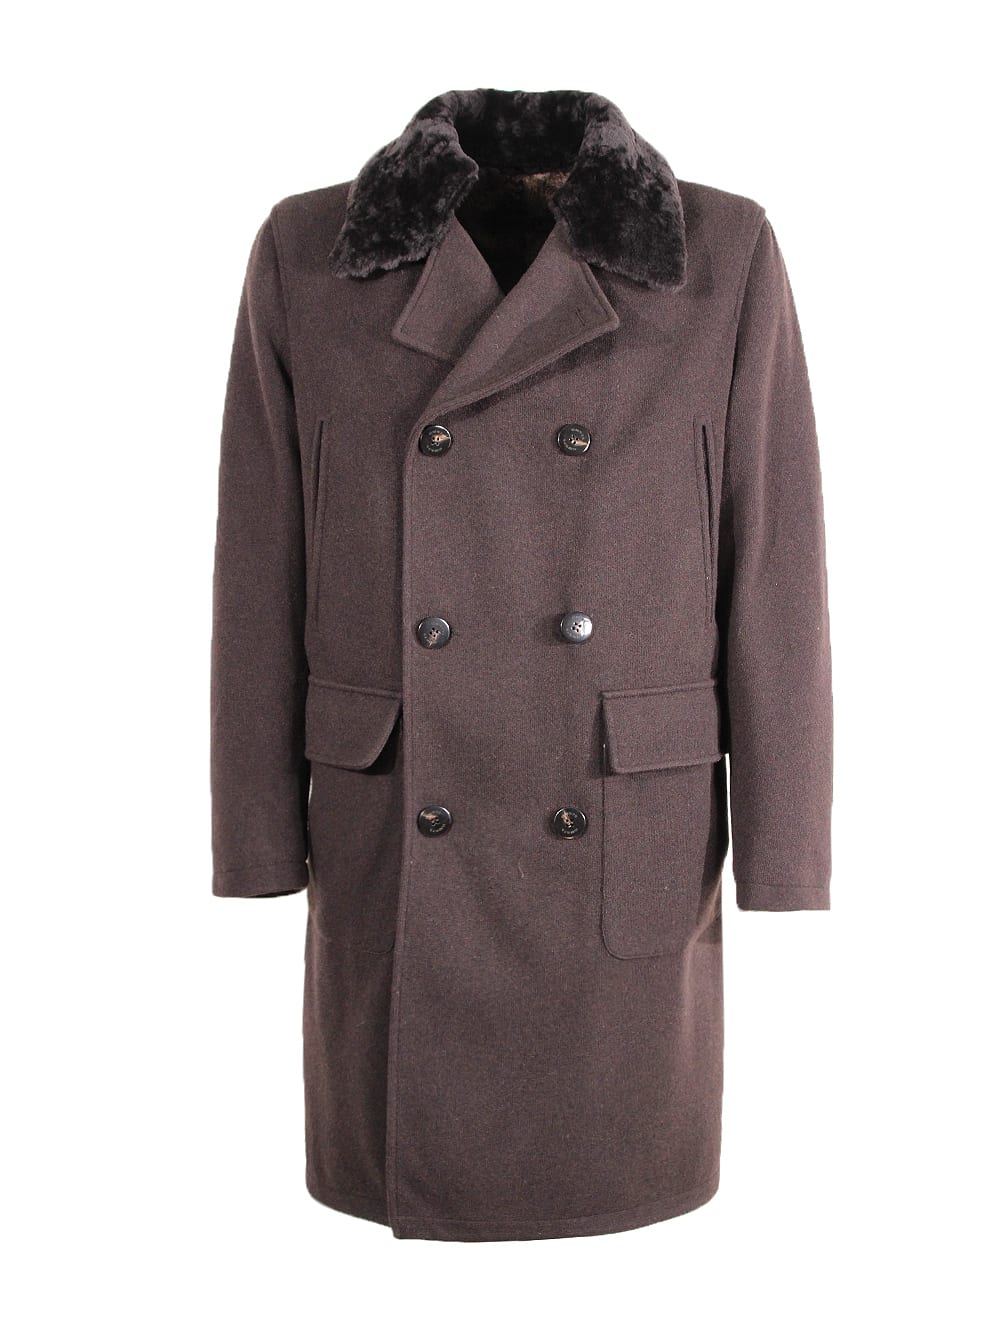 GMS-75 DOUBLE-BREASTED COAT GMS75